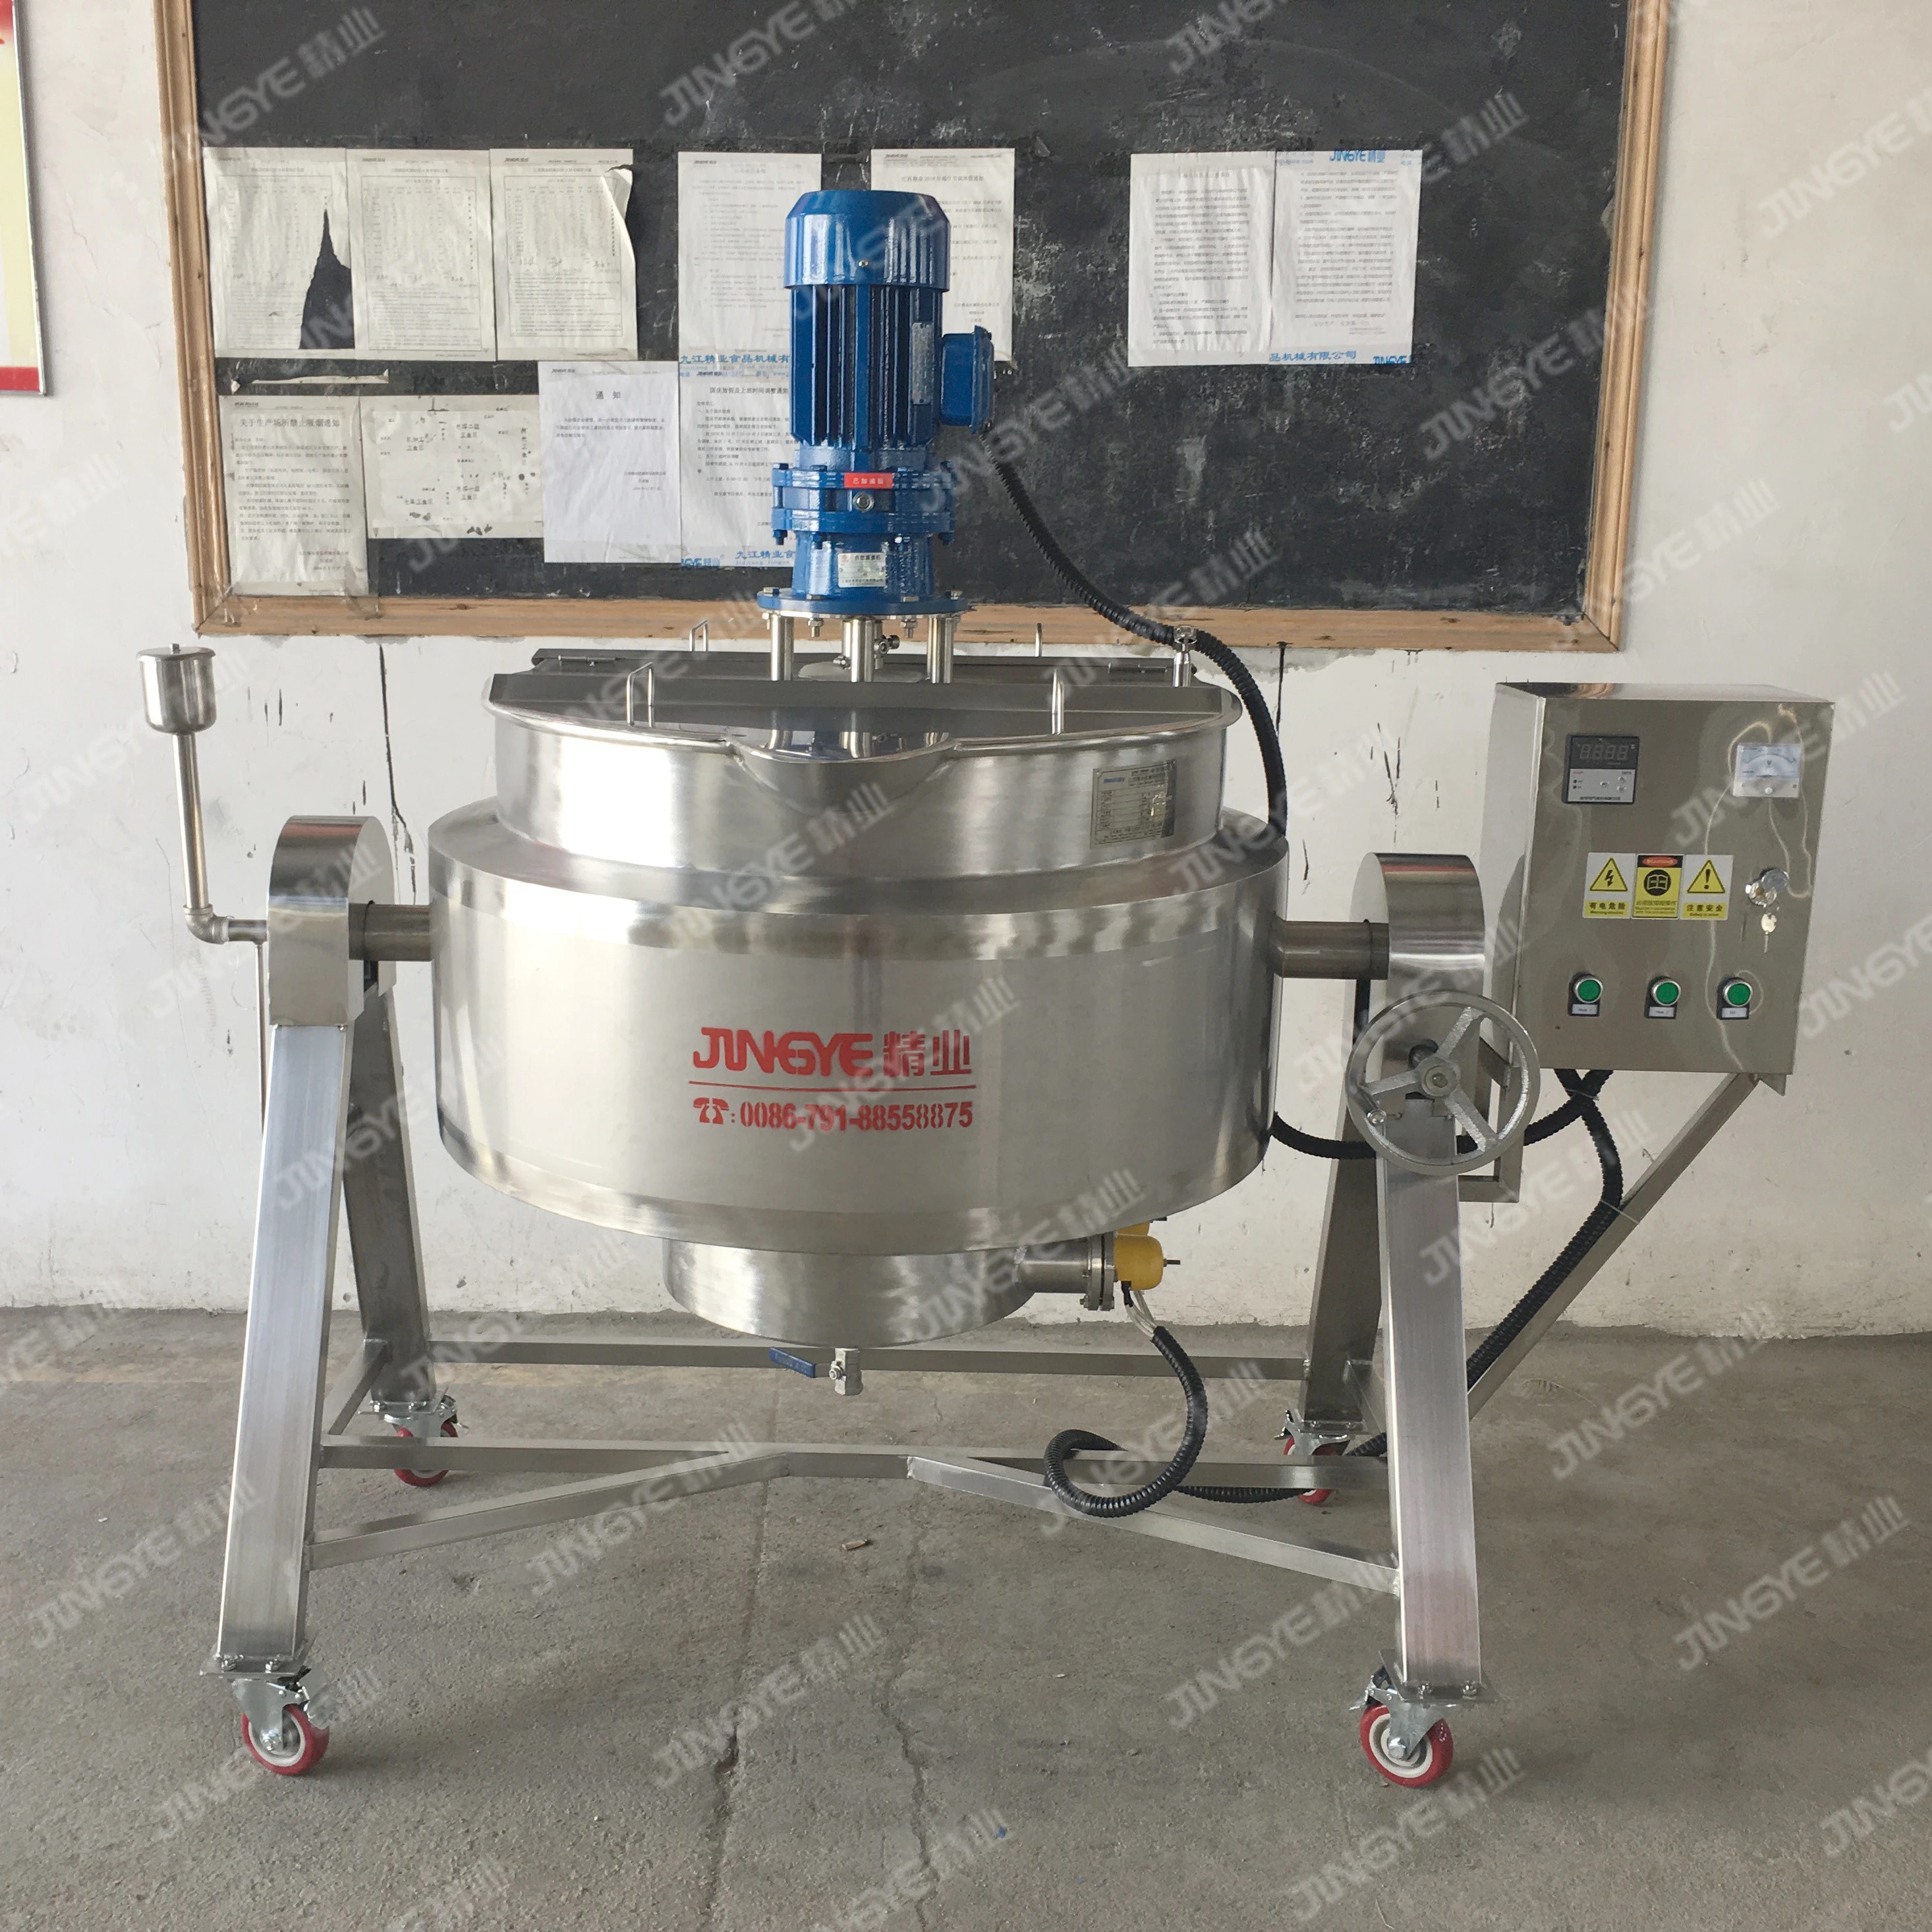 High Quality Nut Products Processing Machine  Tilting Steam Gas Electric Heating Nut Products Jacketed Kettle Cooking Machine